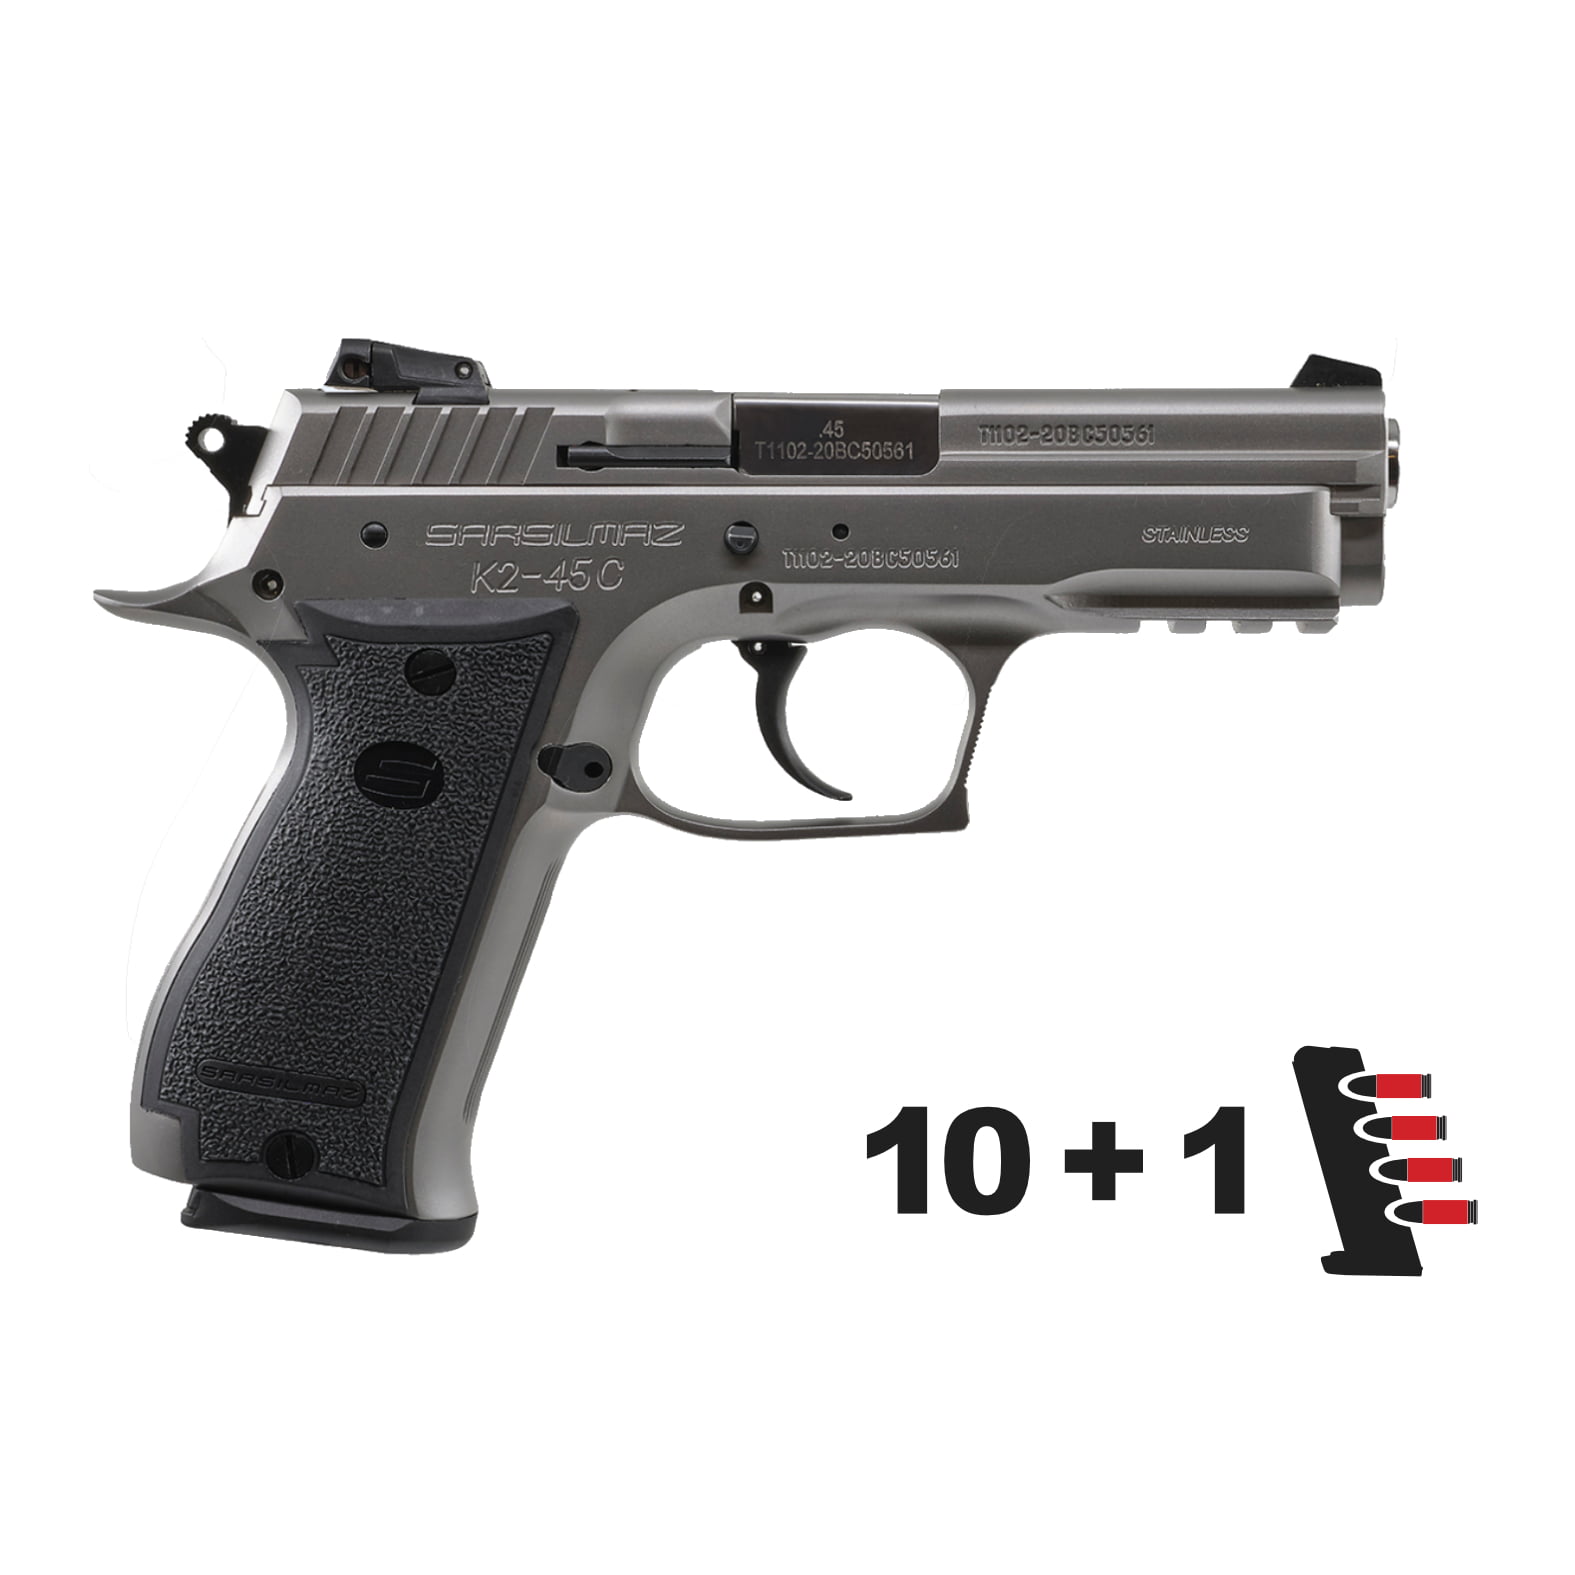 K245CST10 - SAR K2 45C Compact Stainless .45 ACP - 10 rounds